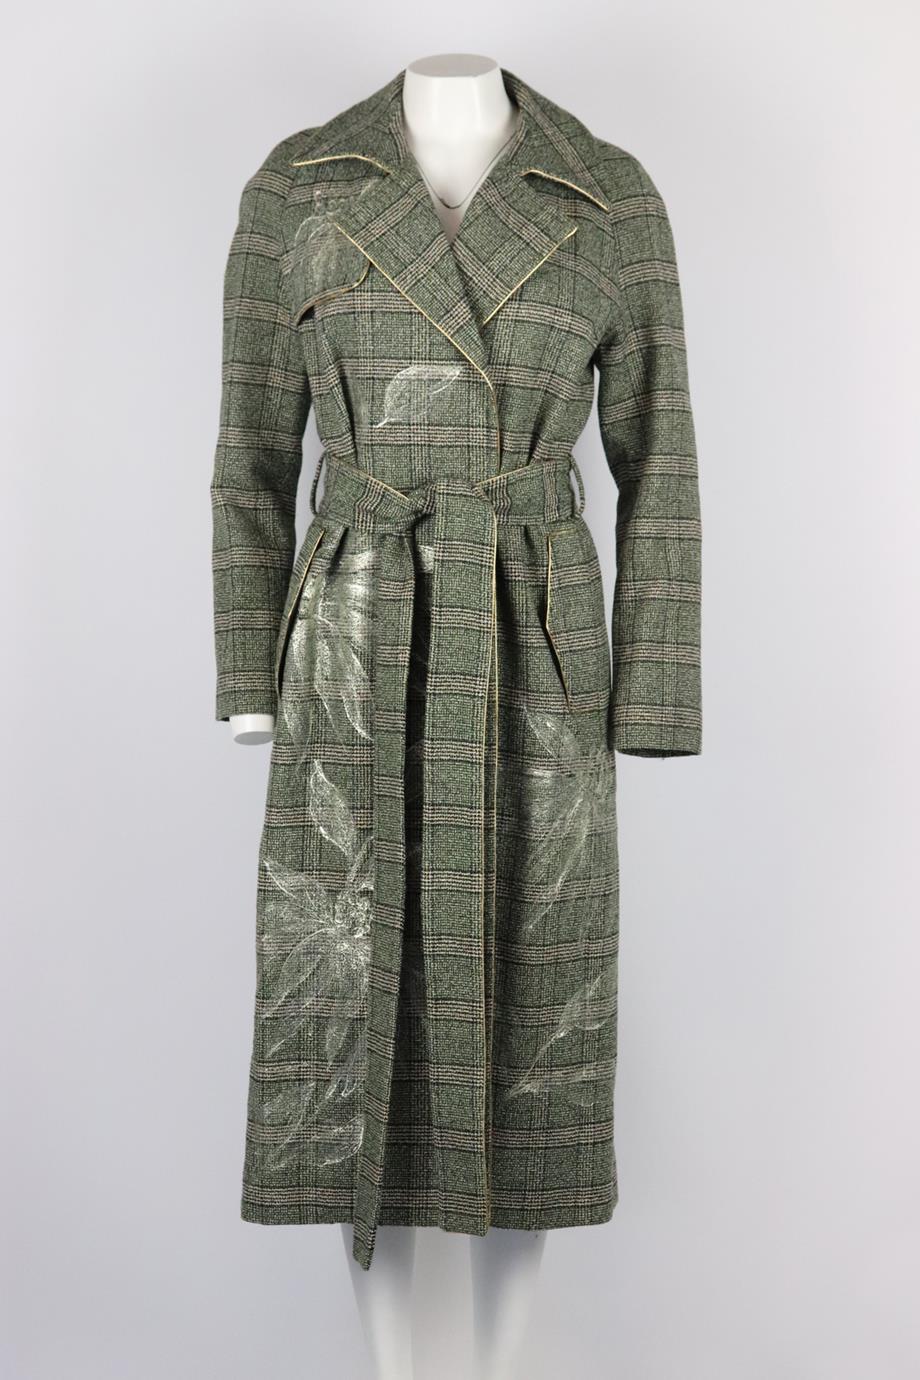 PETER PILOTTO BELTED CHECKED WOOL COAT UK 10